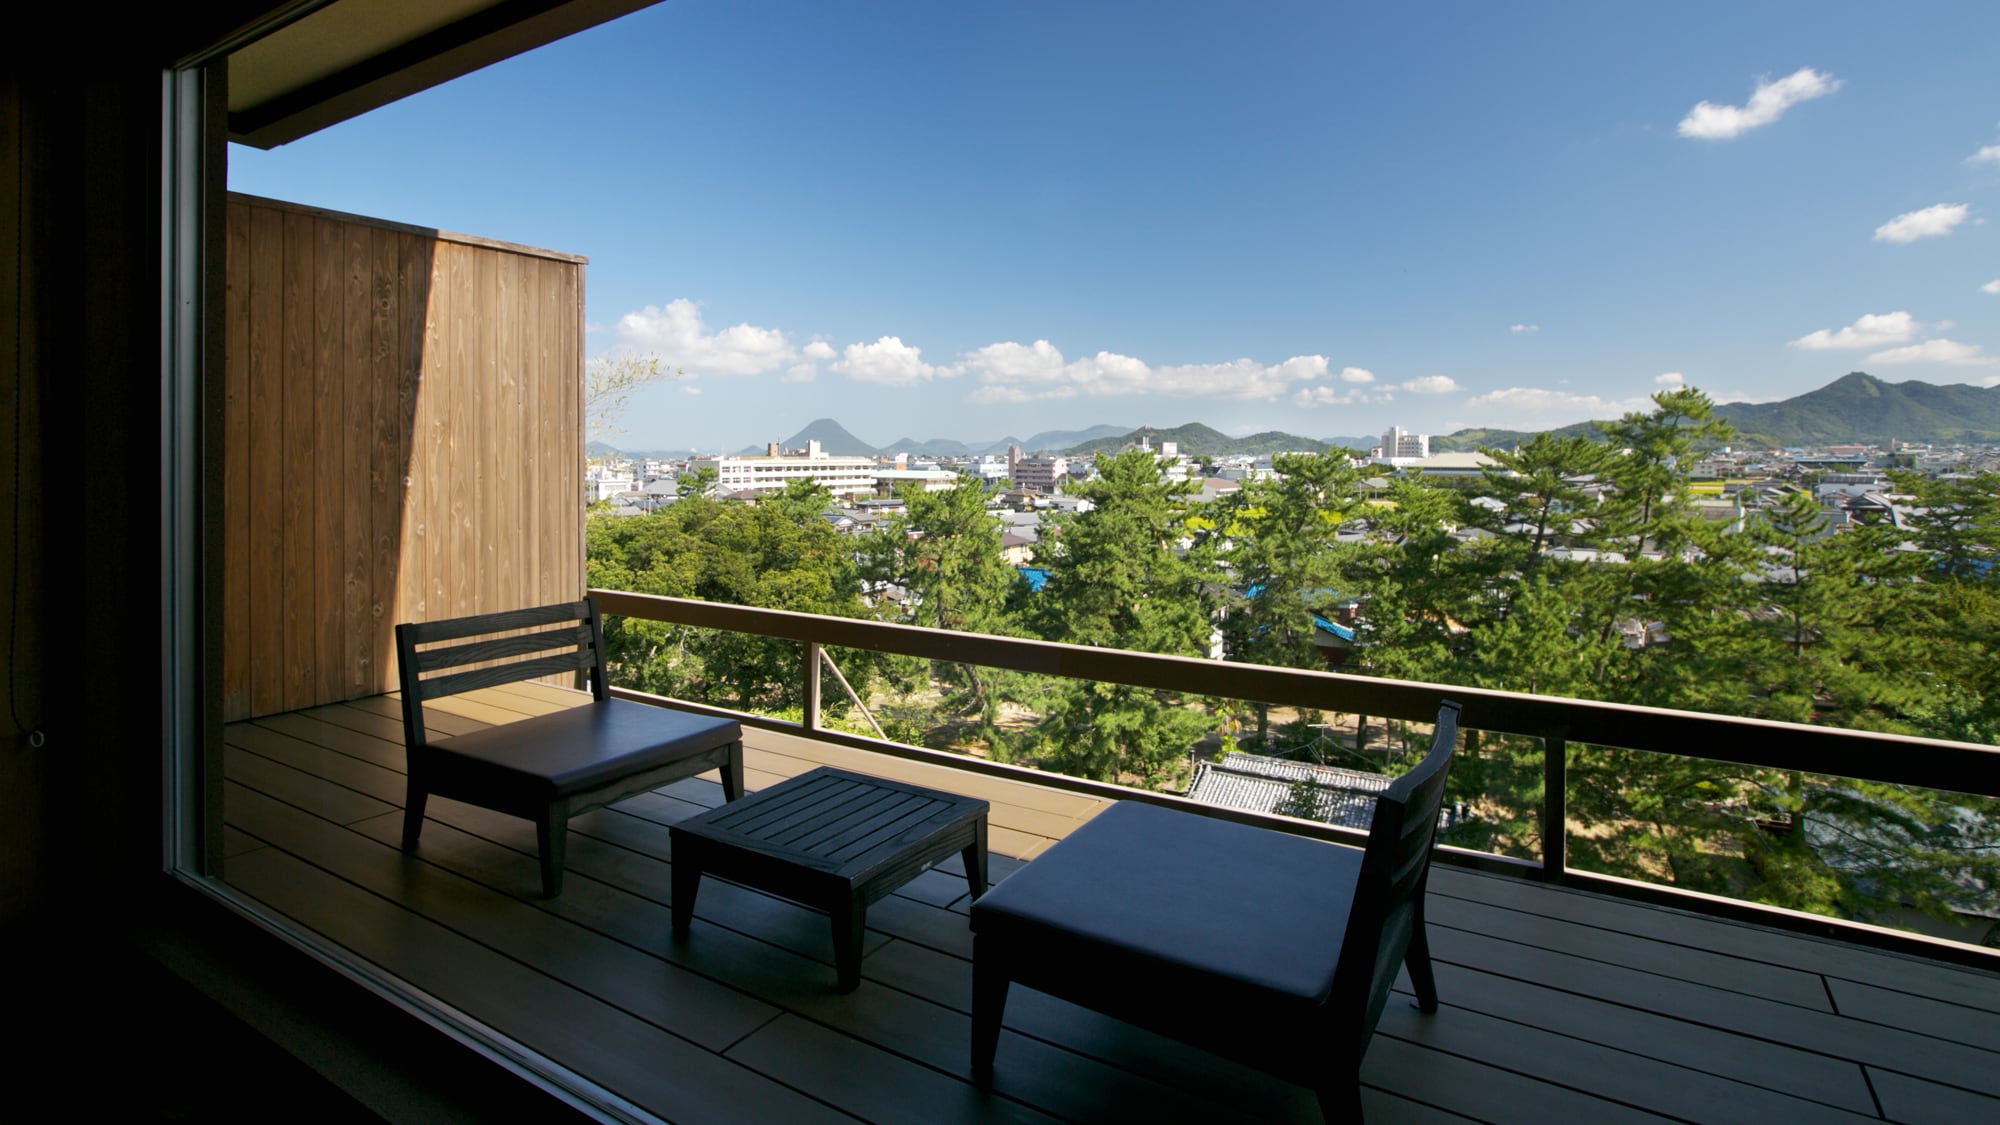  All guest rooms on the Shogetsu Terrace facing the east and overlooking the Sanuki Plain